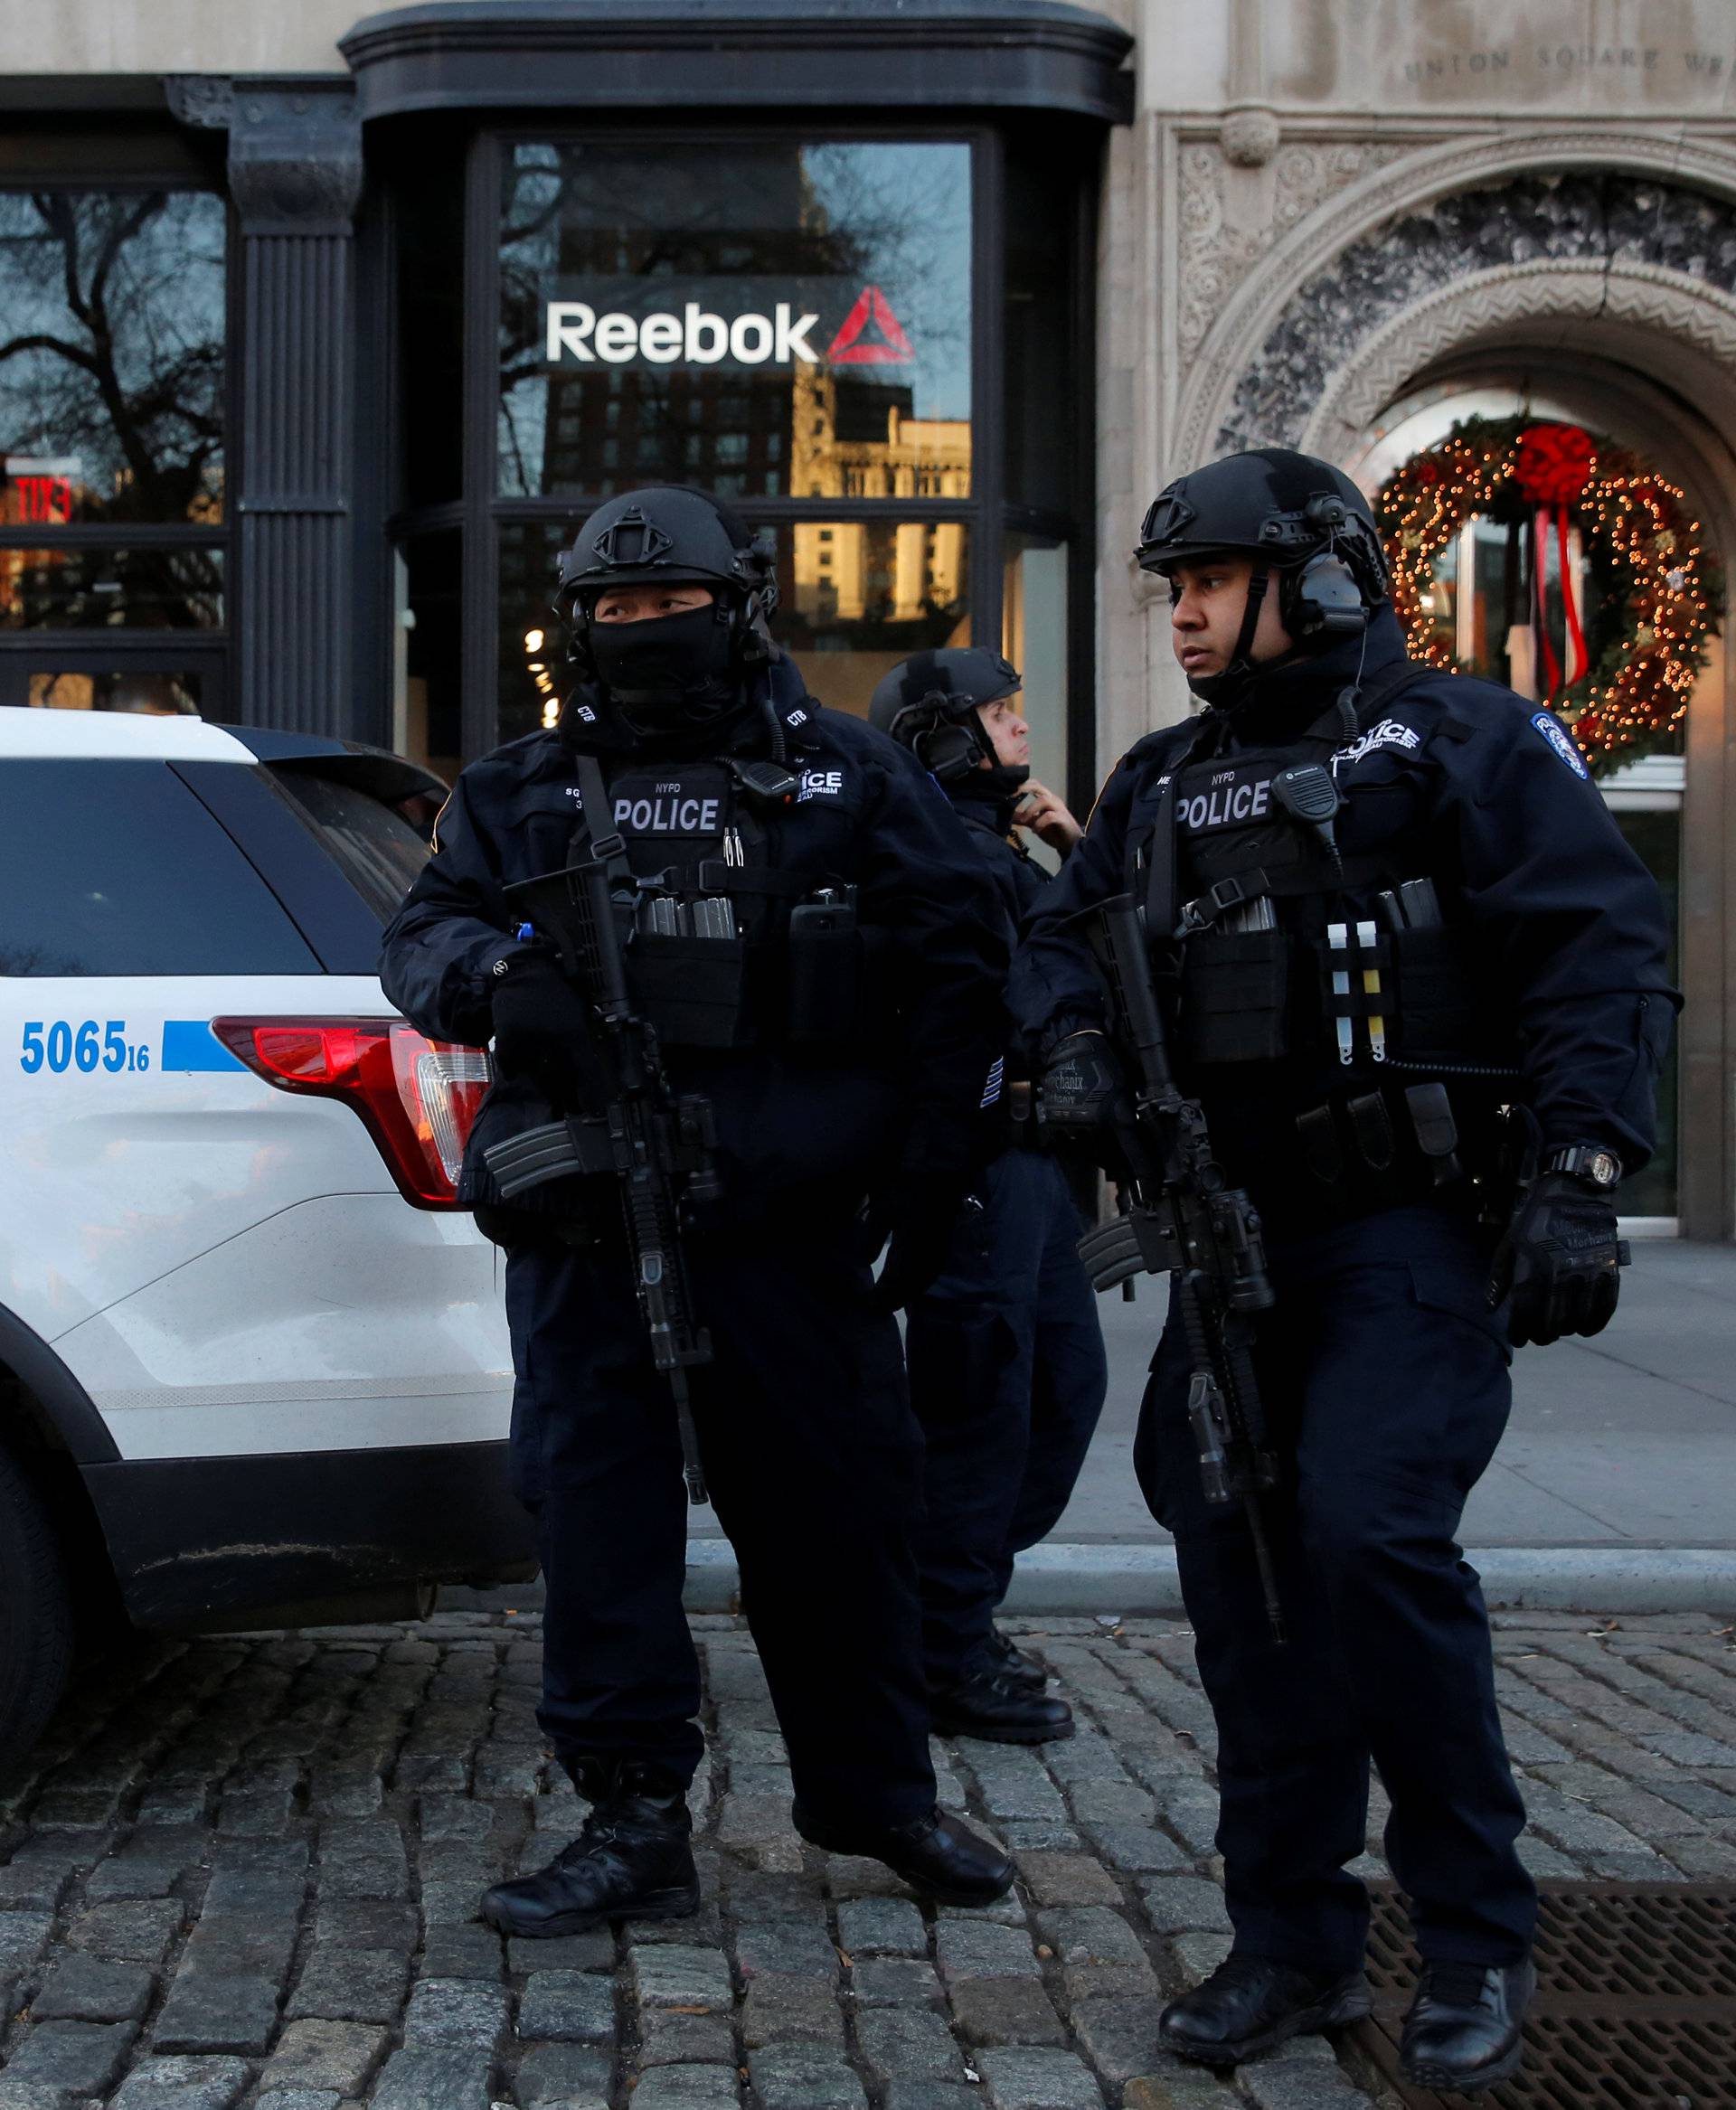 Members of the New York Police Department's Counterterrorism Bureau arrive to stand watch at the Union Square Holiday market following the Berlin Christmas market attacks in Manhattan, New York City, U.S.